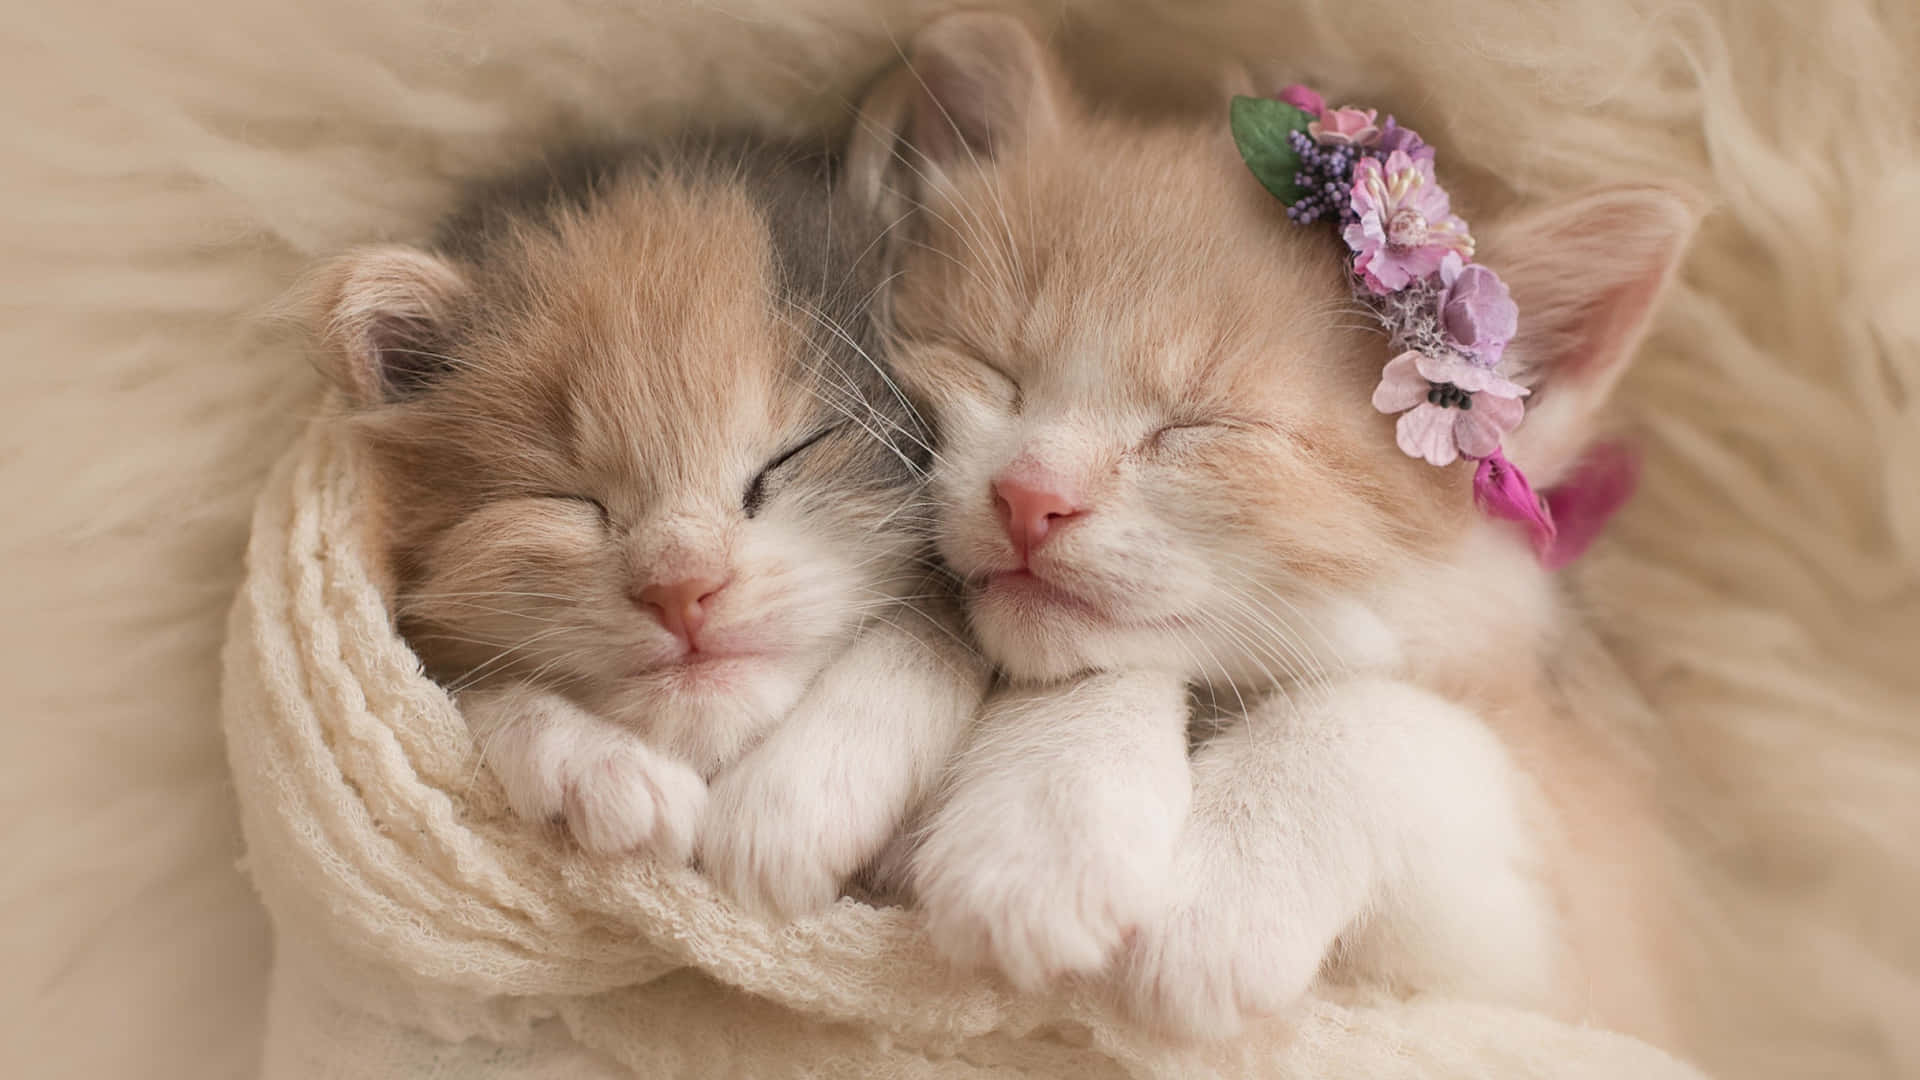 Adorable Litter Of Kittens Cuddling Up For A Nap.